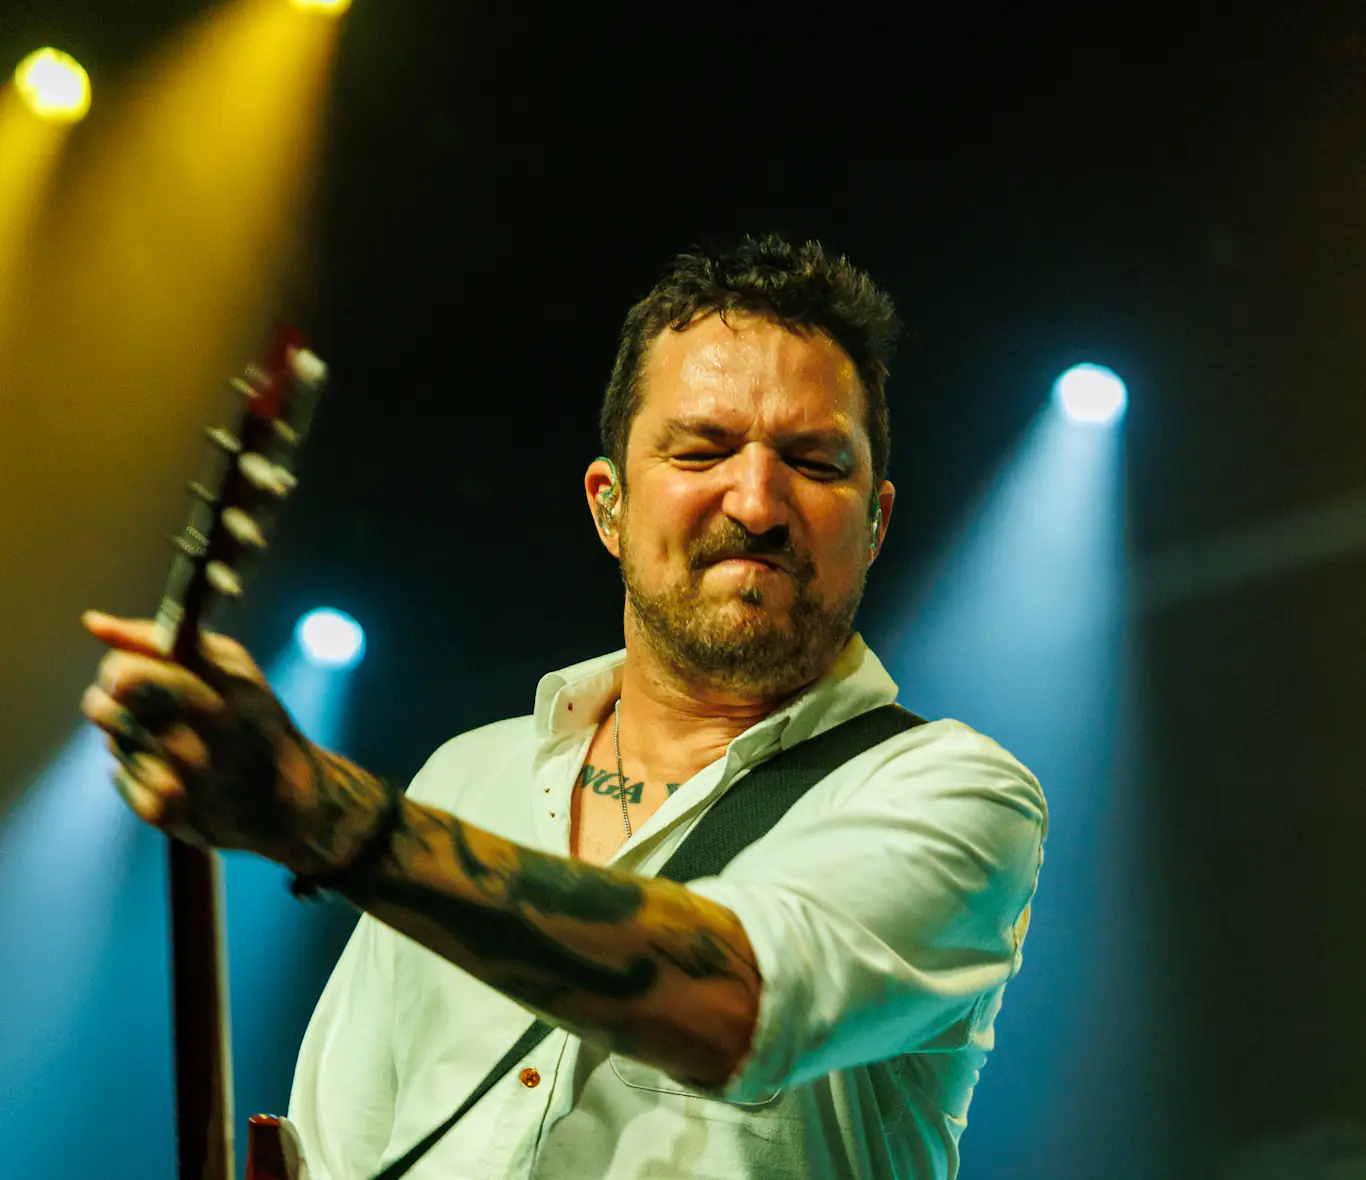 INTERVIEW: Frank Turner – “The next album is about being in your forties and not giving a f**k.”